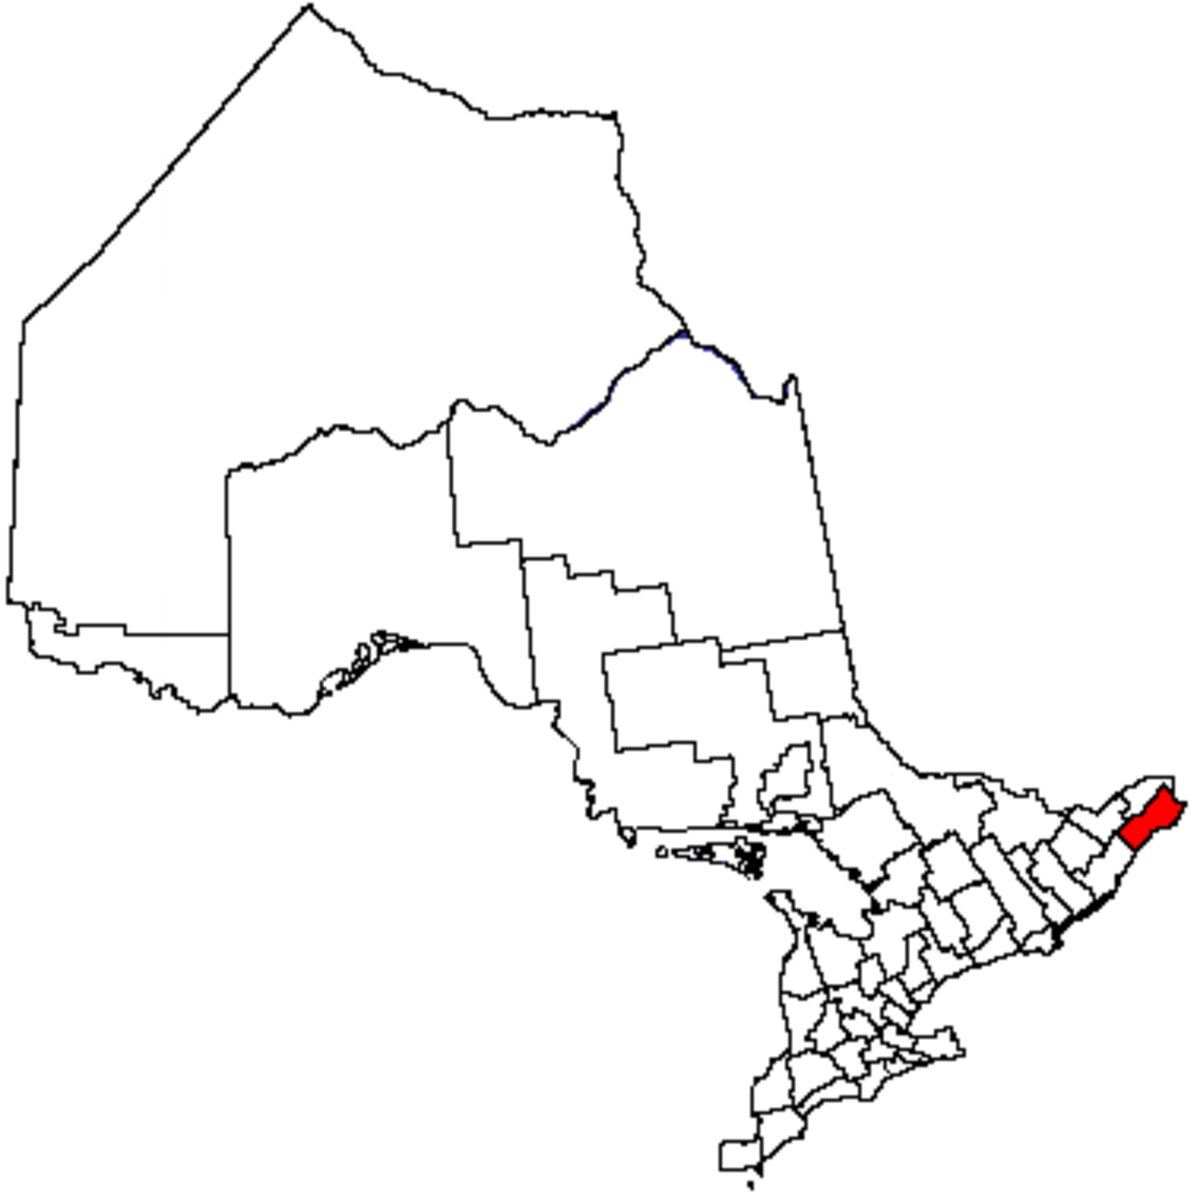  Map location of Stormont, Dundas and Glengarry United Counties, Ontario